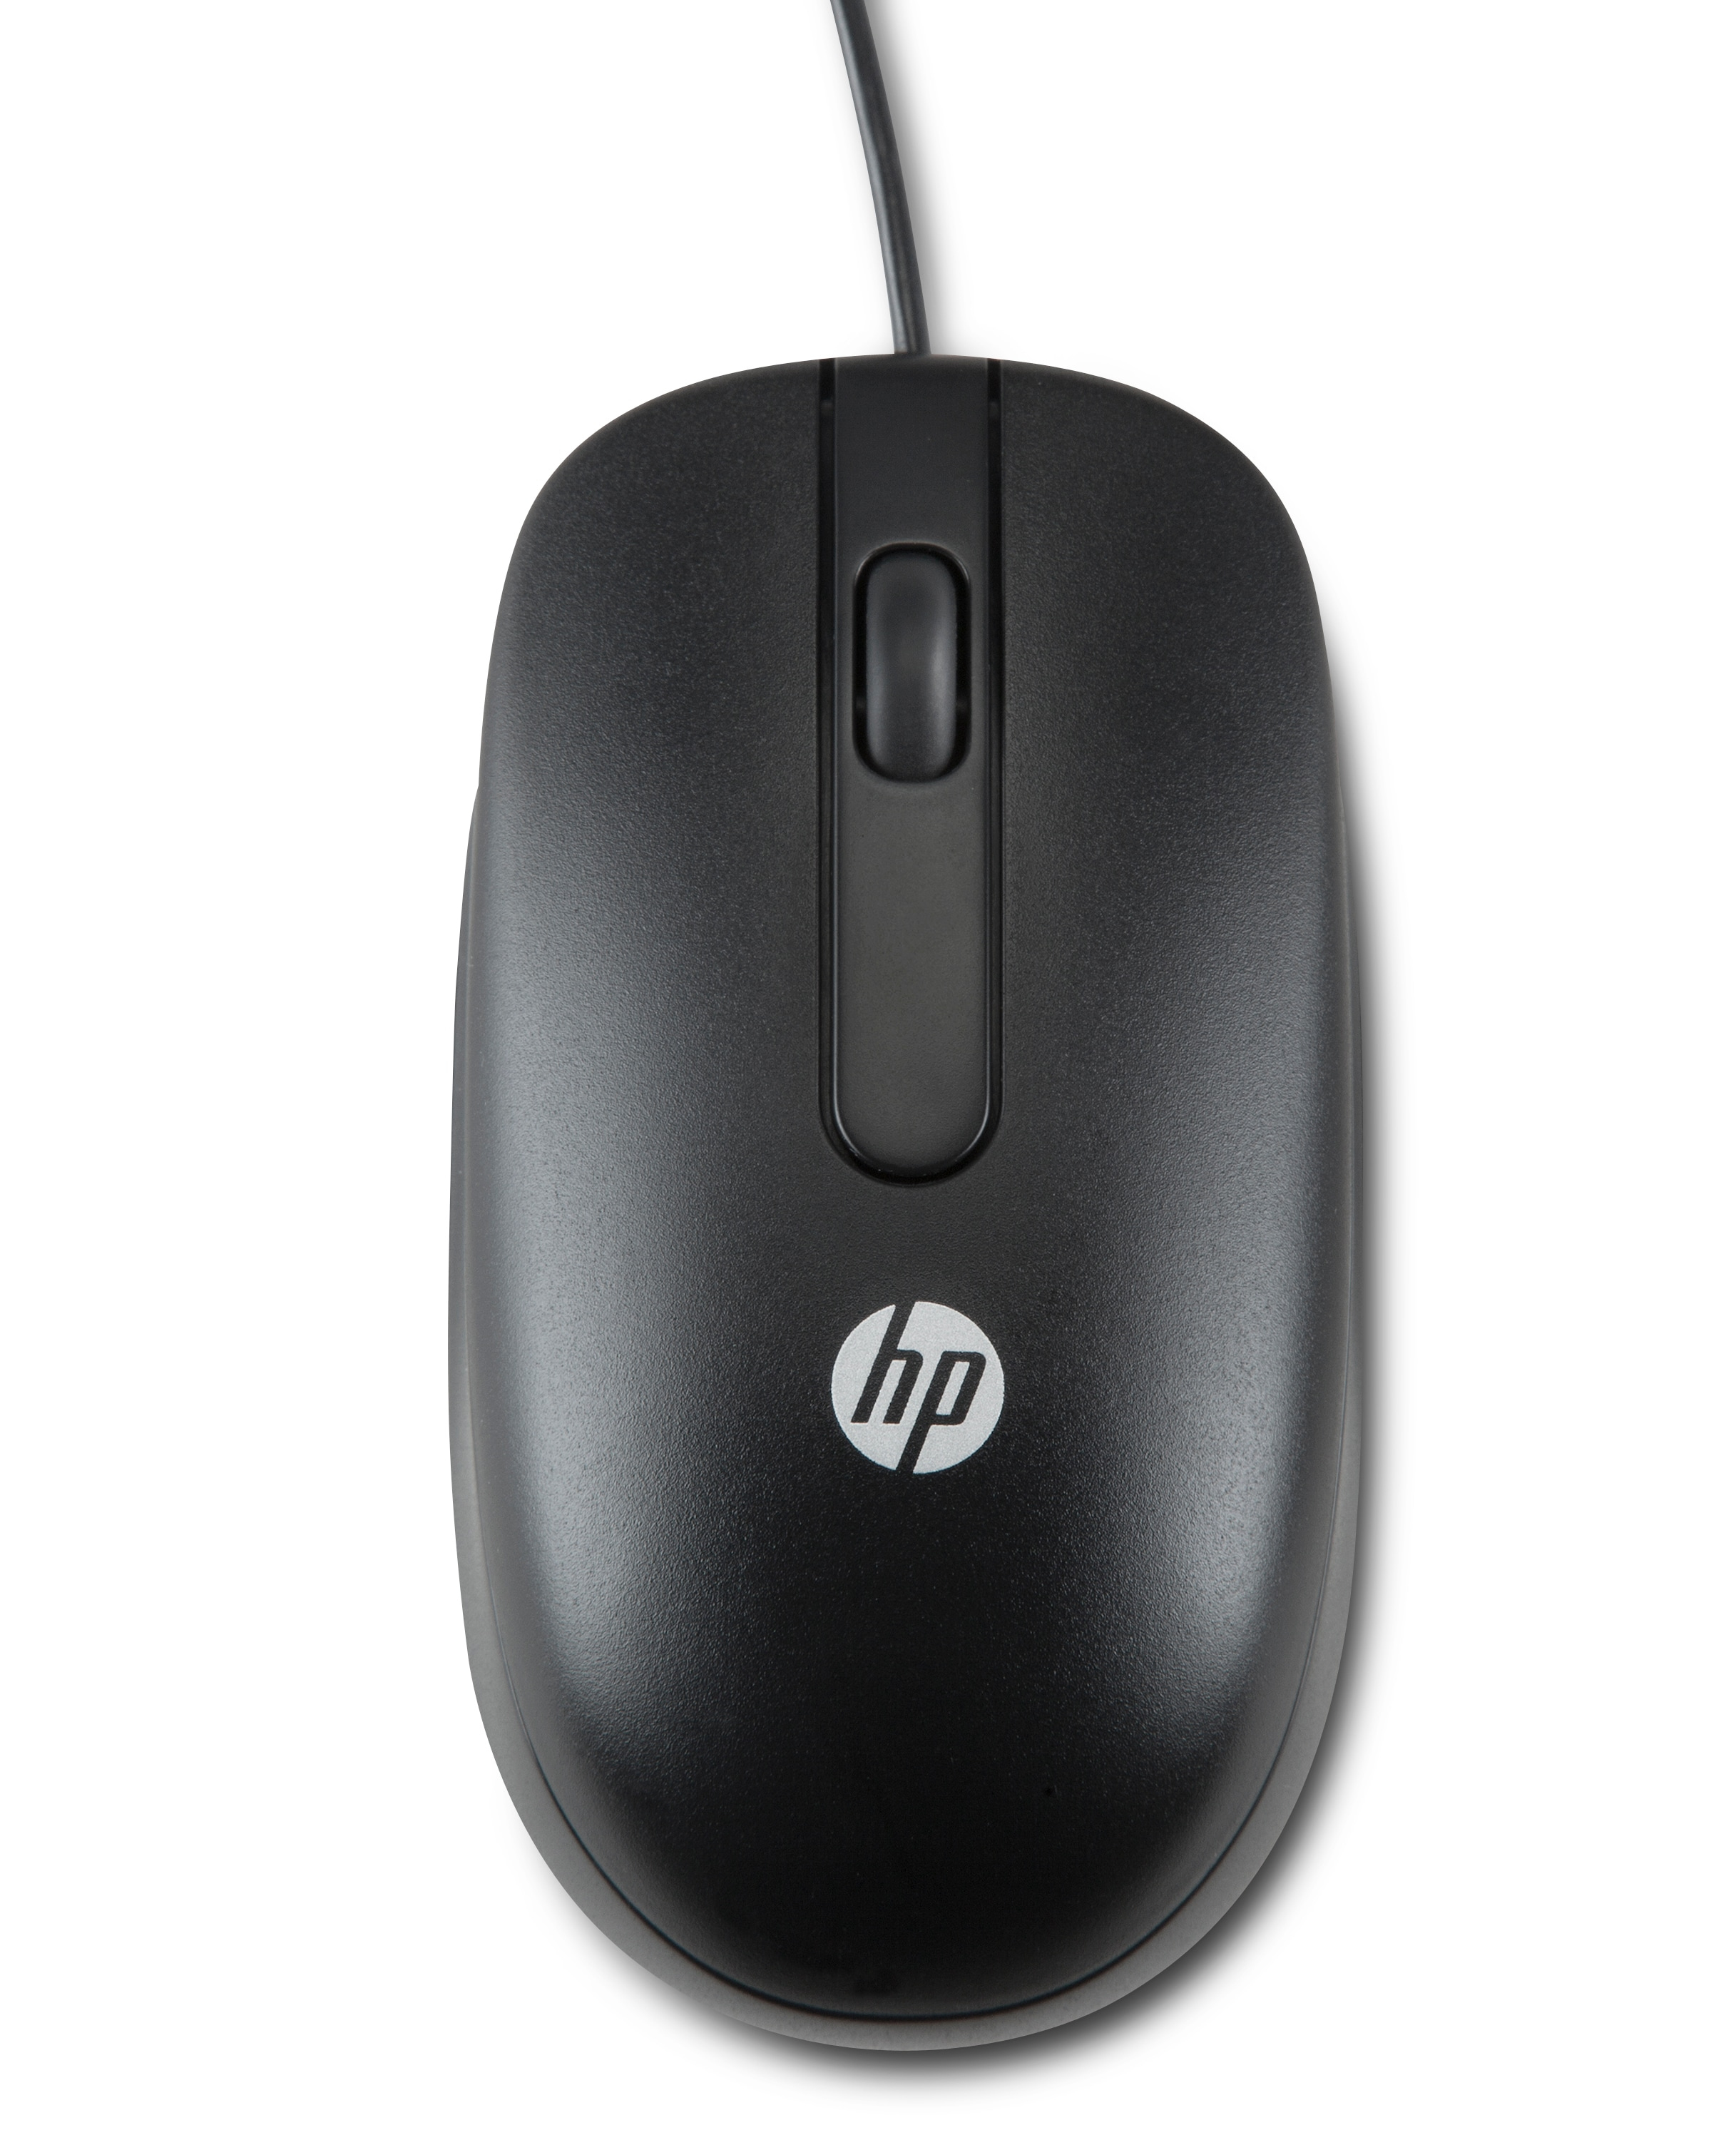 Hp Wireless Mouse Drivers For Mac